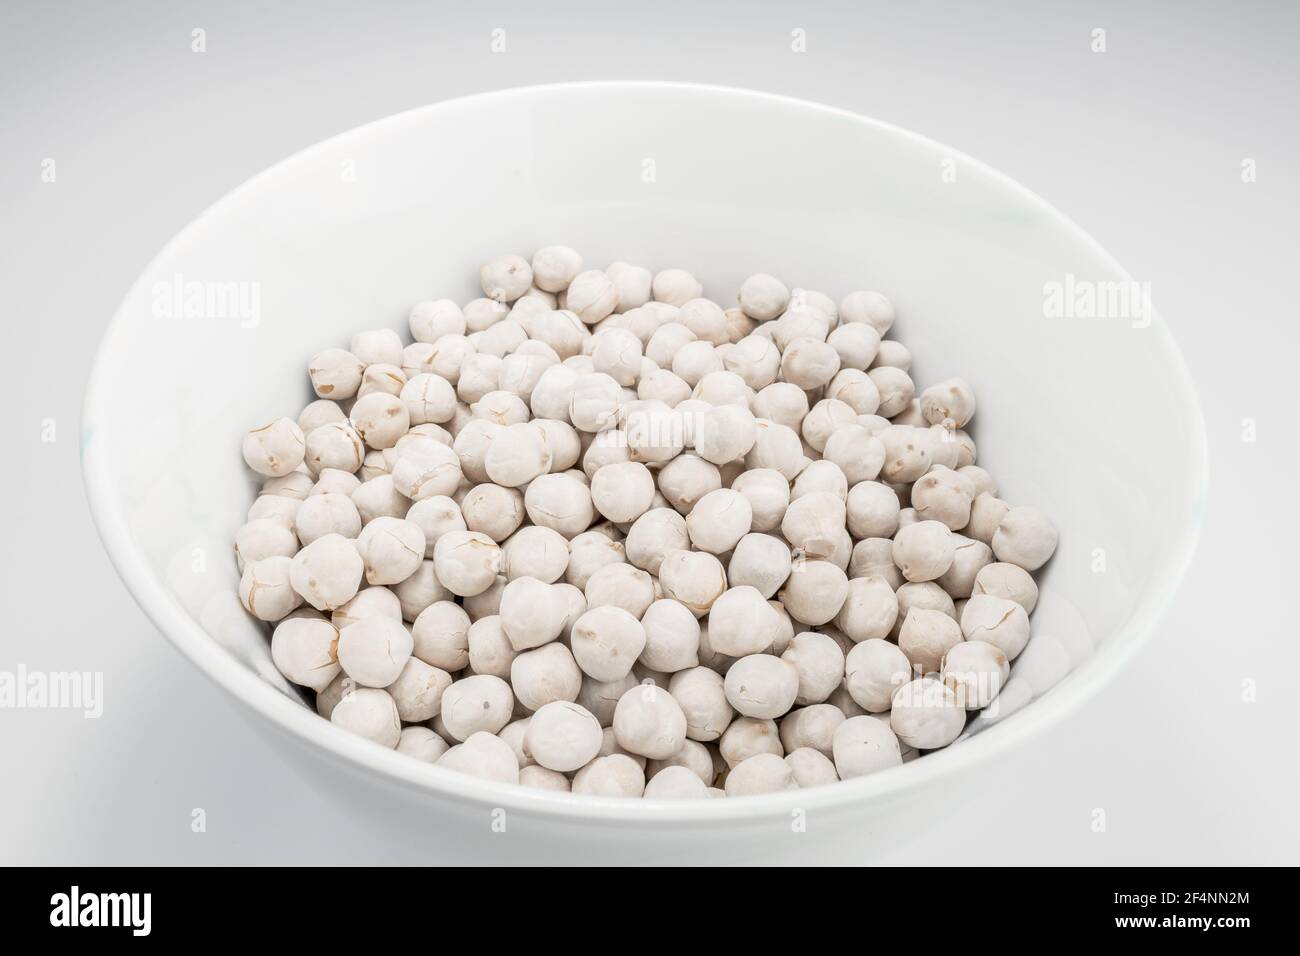 White chickpeas standing in white bowl Stock Photo